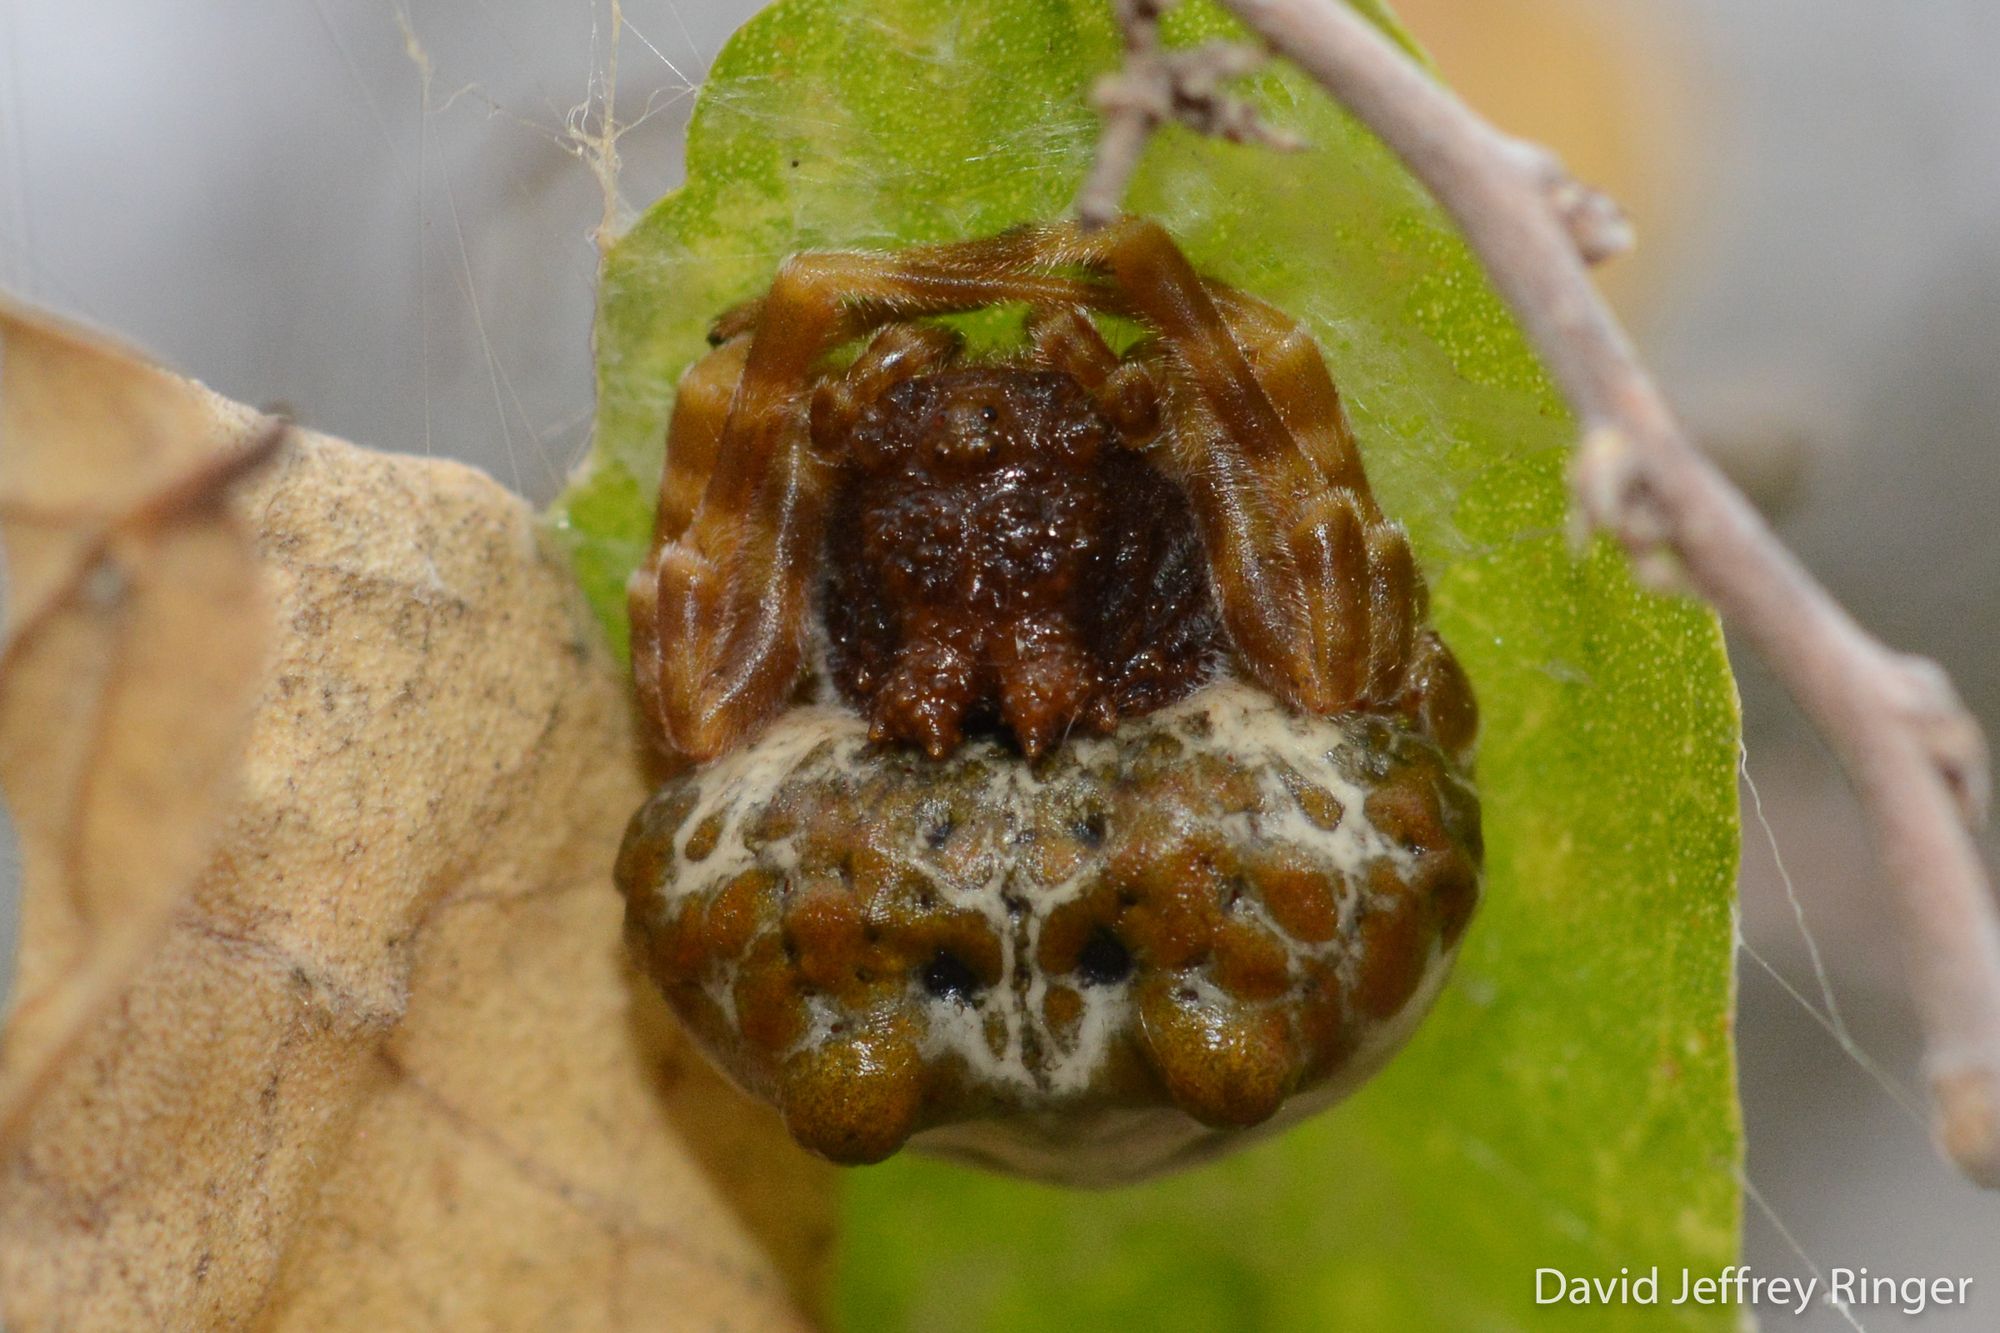 On Spider Biodiversity, My Arachnophobia, and Our Place in the Universe